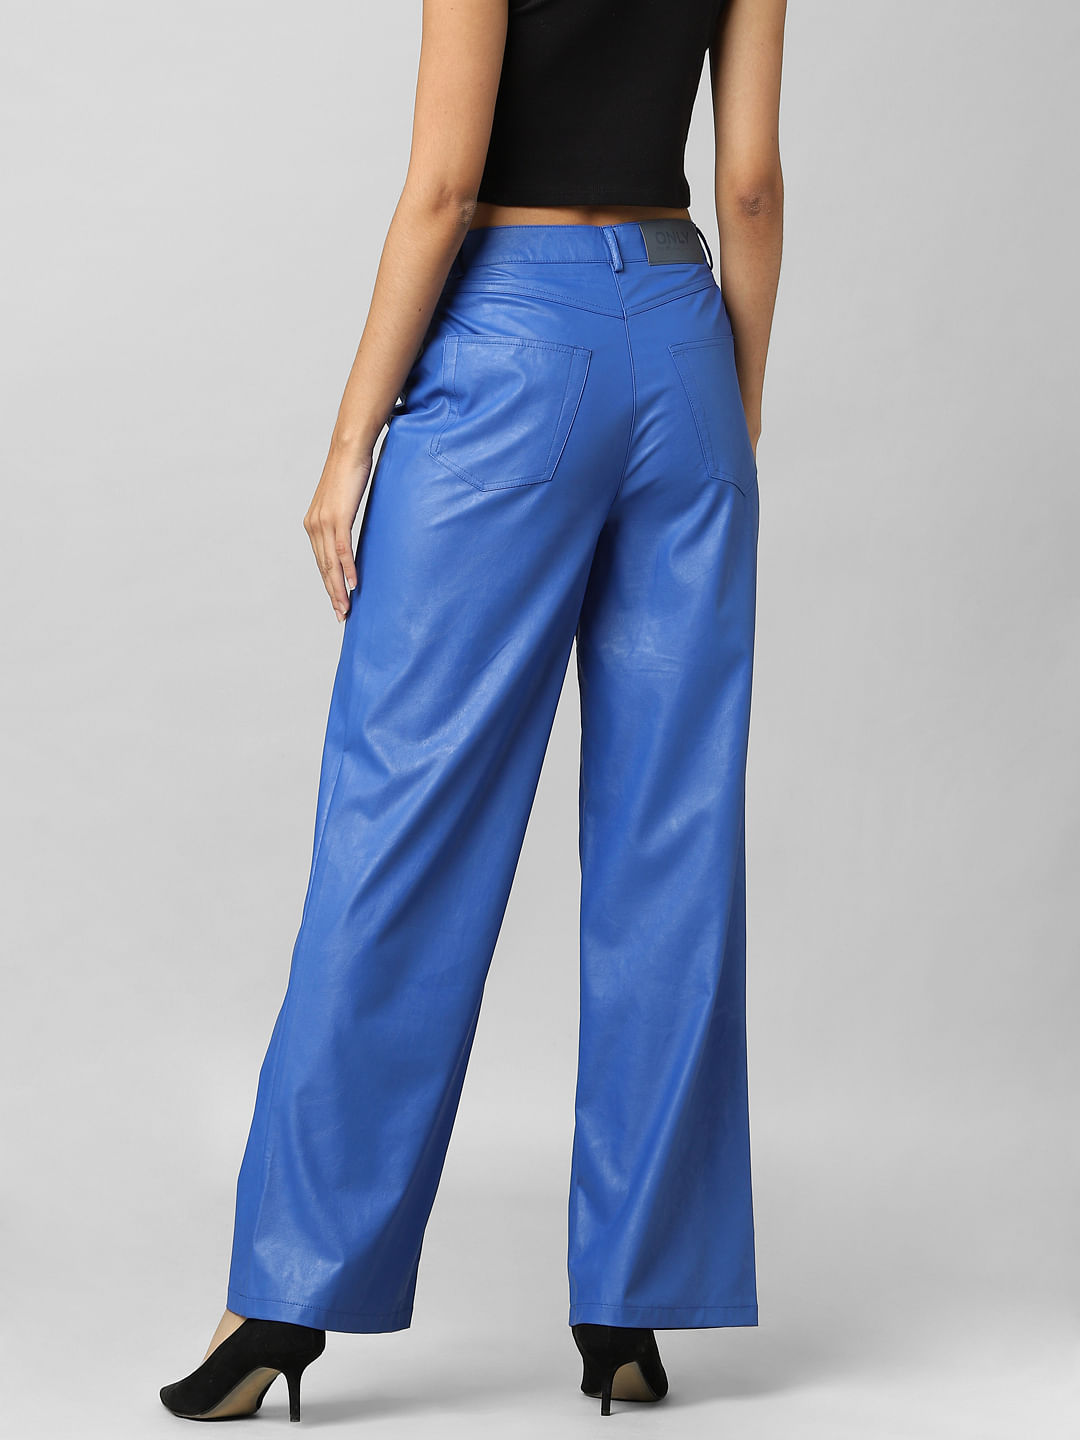 Buy Navy Blue Trousers & Pants for Women by Fyre Rose Online | Ajio.com